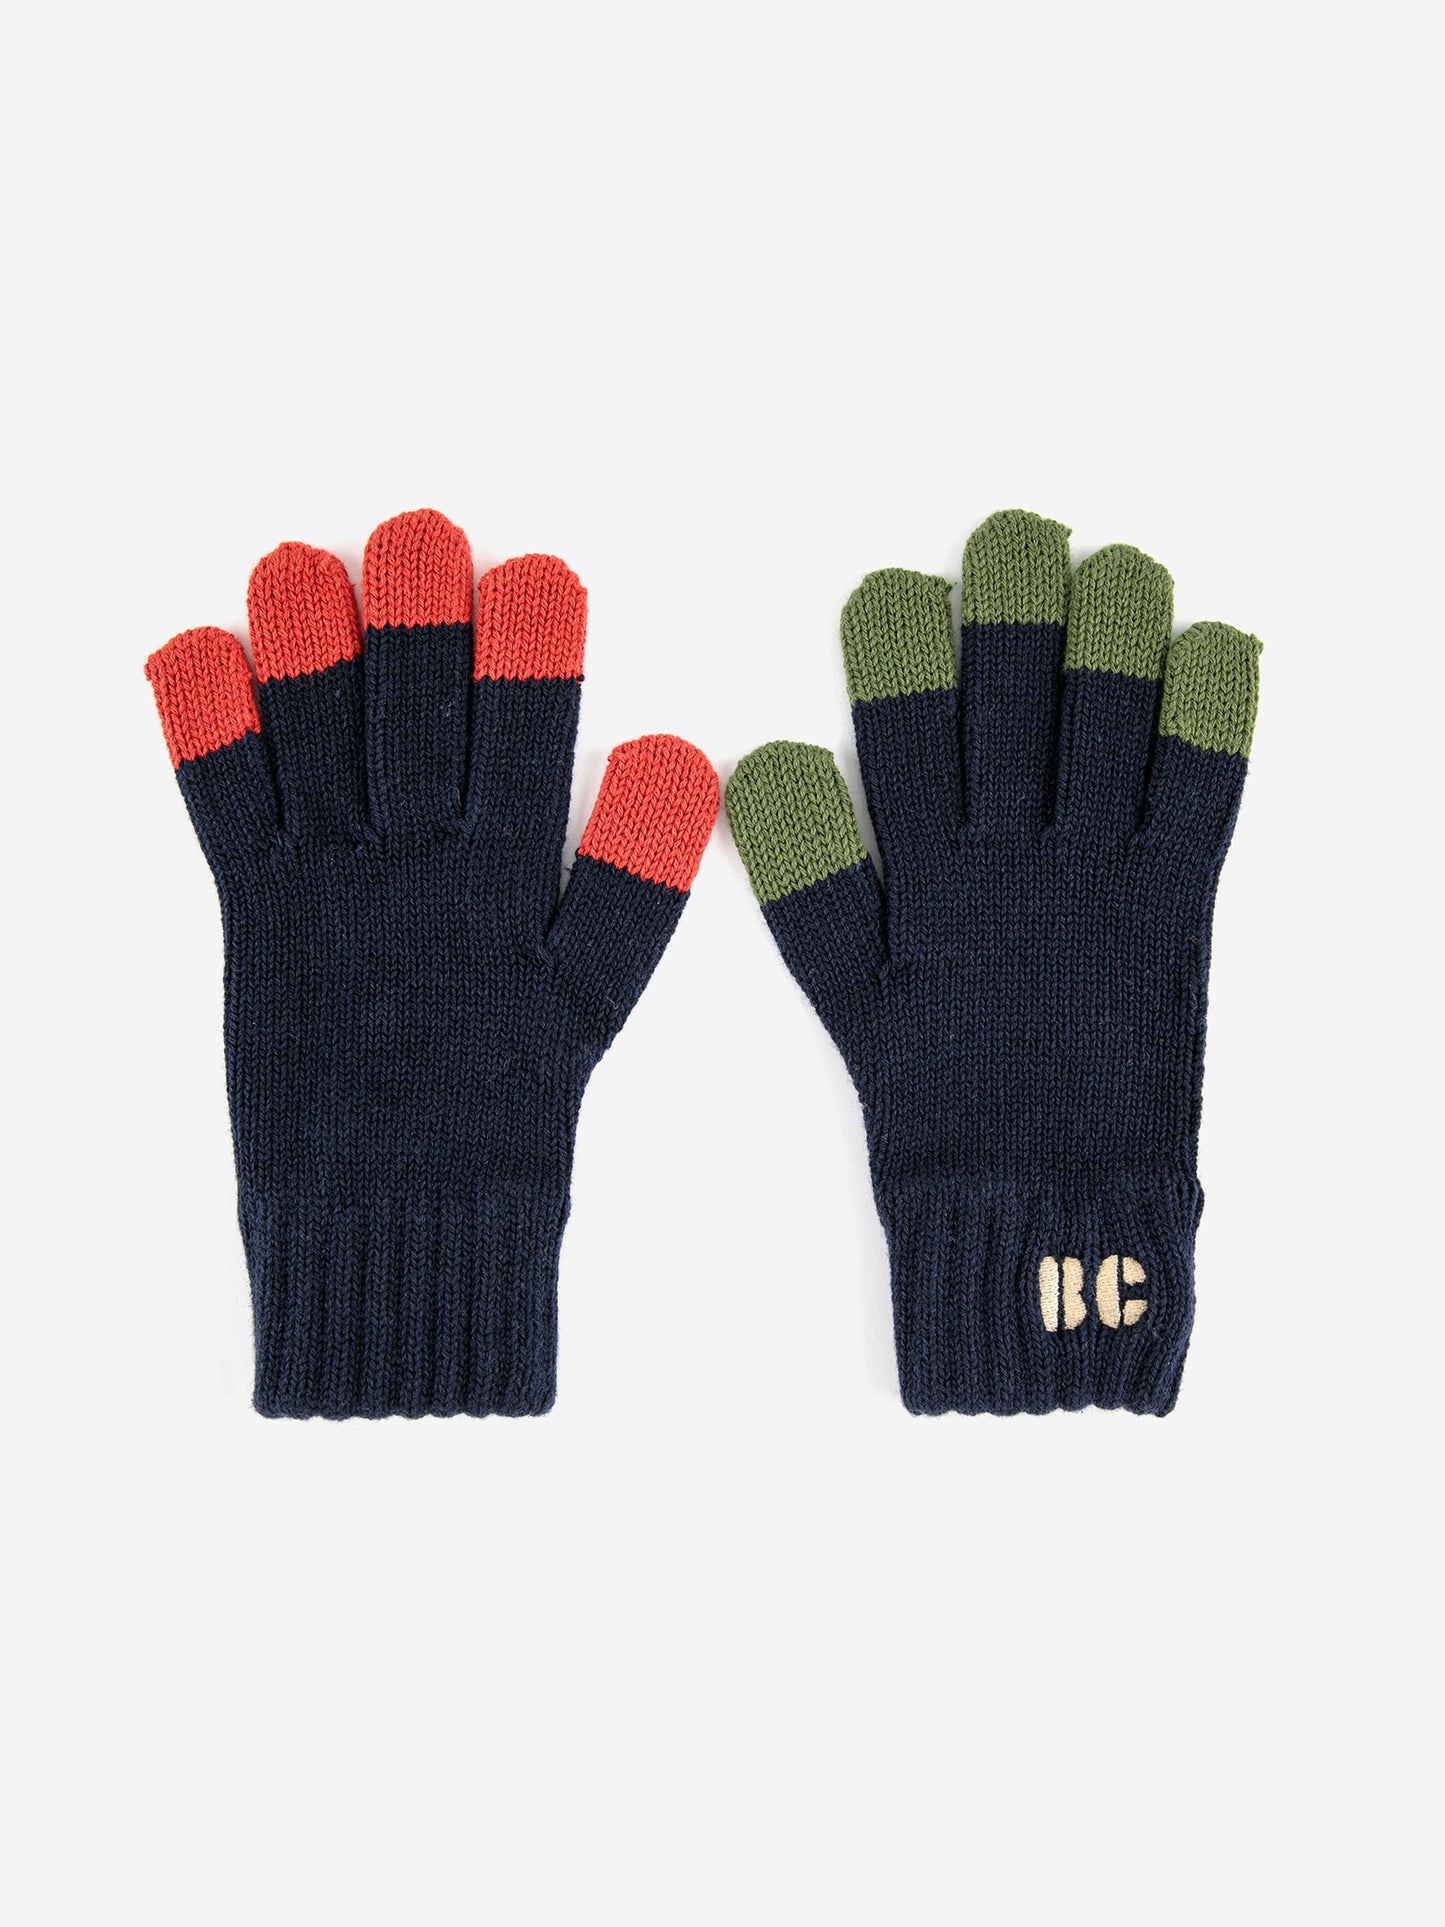 BC Colored Fingers knitted gloves Choses Bobo –